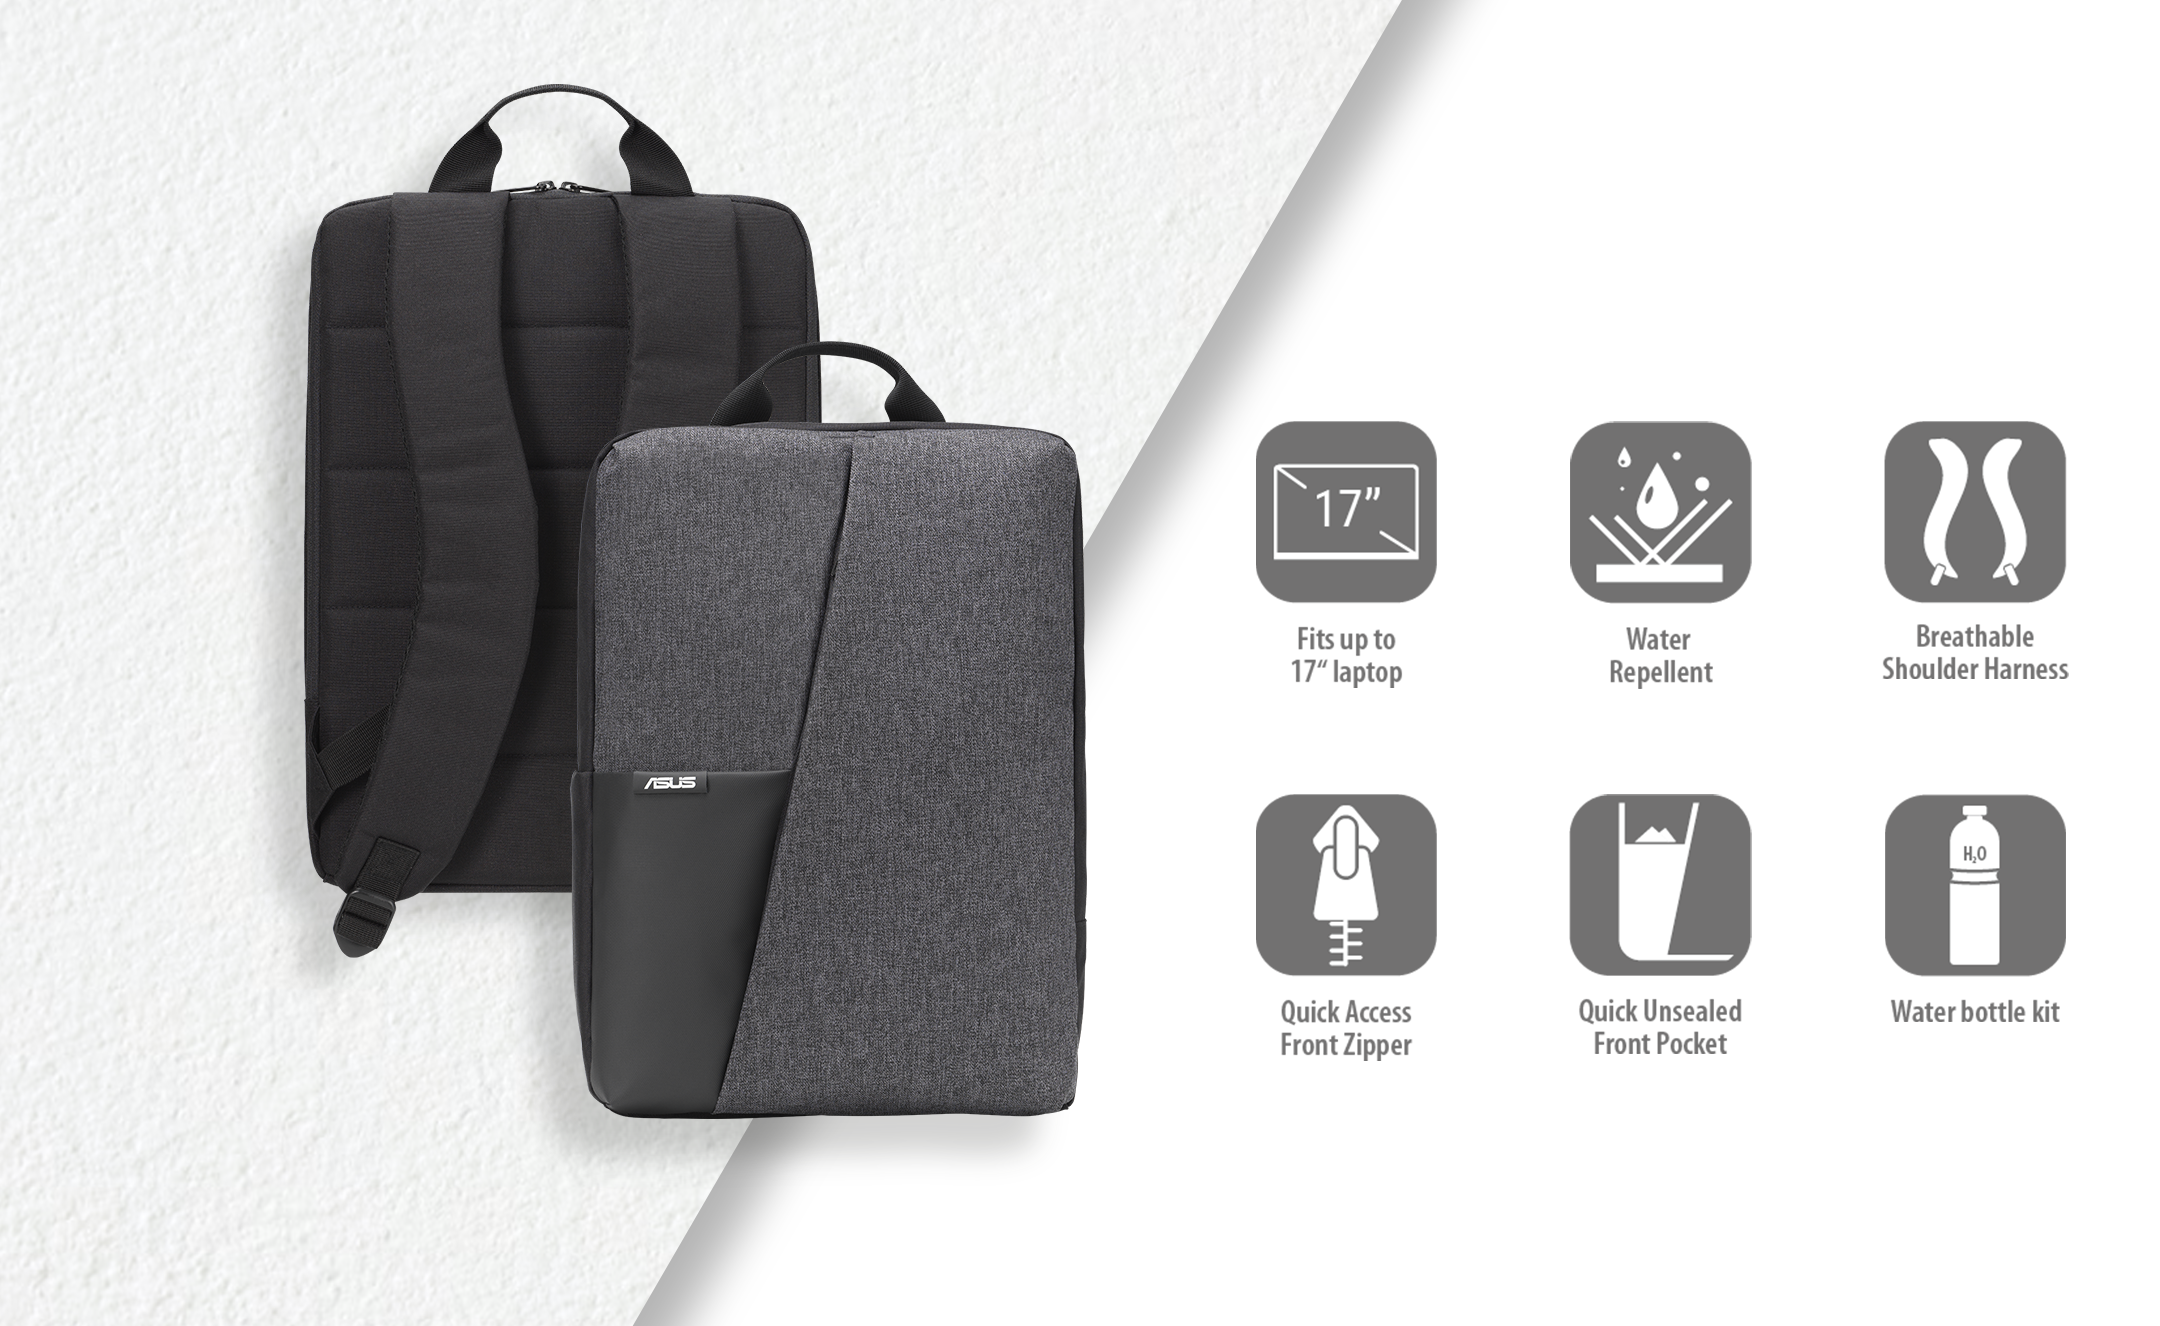 The front and rear views of the ASUS AP4600 backpack, as well as six key feature icons, including “fits up to 17 inch laptop”, “water repellent”, “breathable shoulder harness”, quick access front zipper”, “quick unsealed front pocket”, and “water bottle kit”.